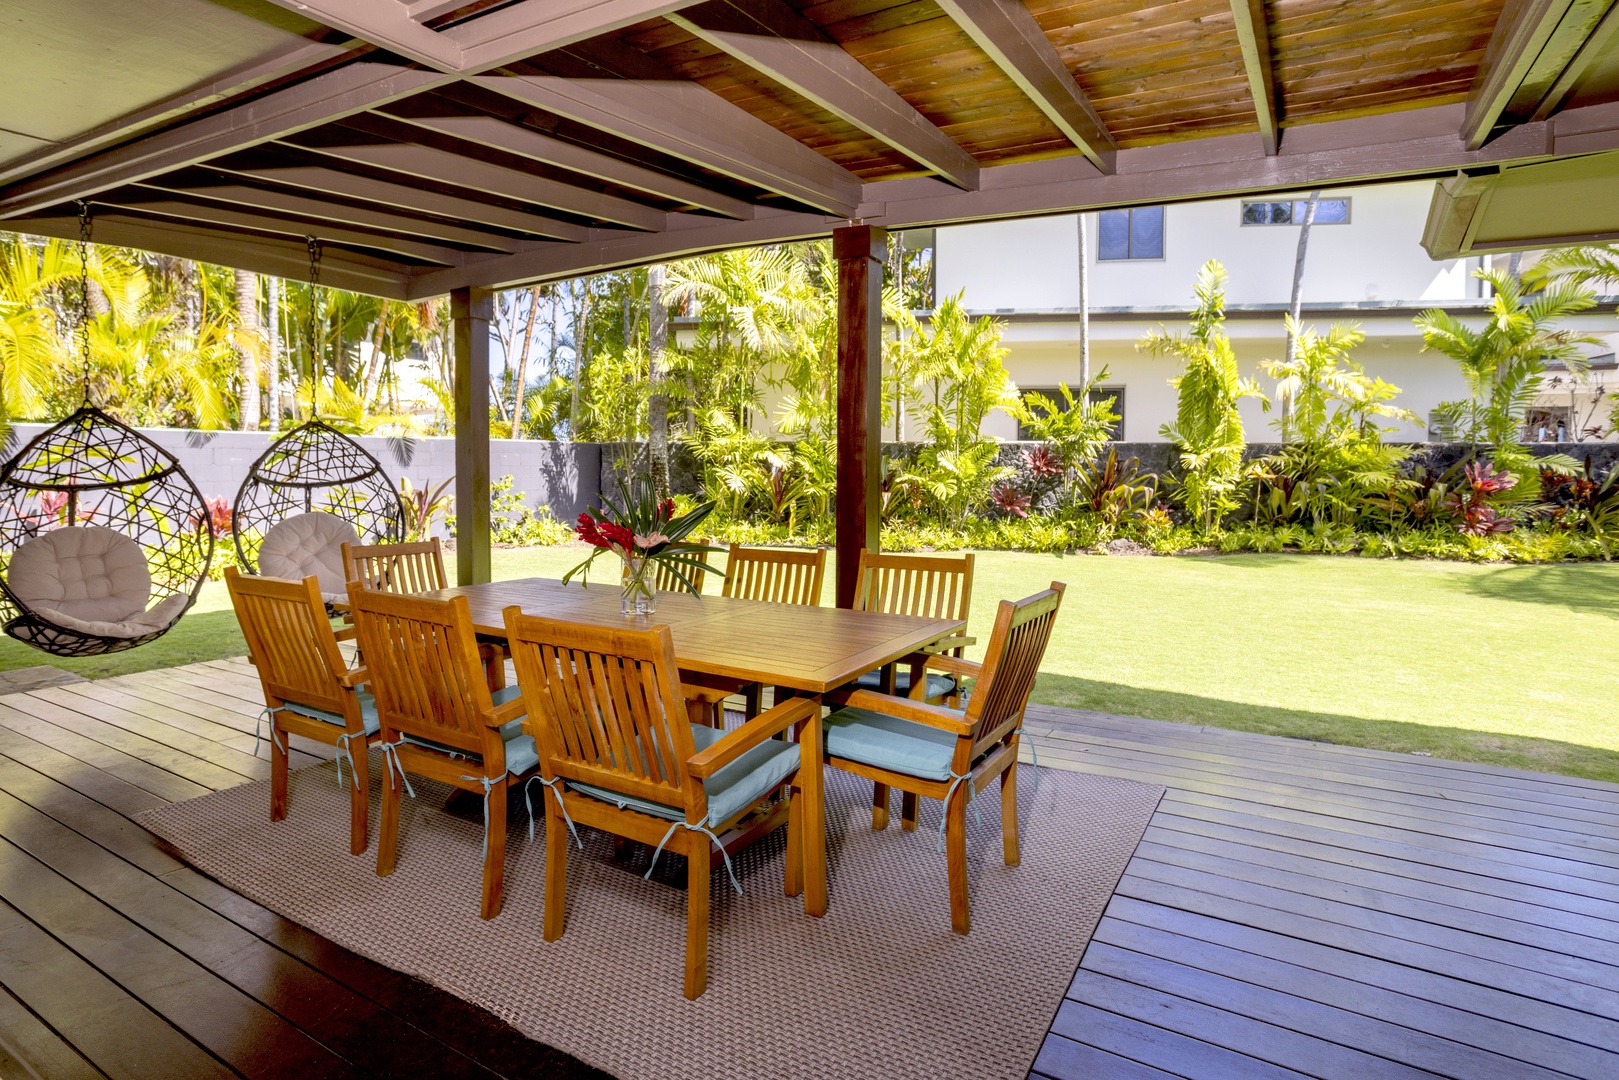 Kailua Vacation Rentals, Mokulua Seaside - Al-fresco dining in the cozy covered lanai with two swings for outdoor relaxation